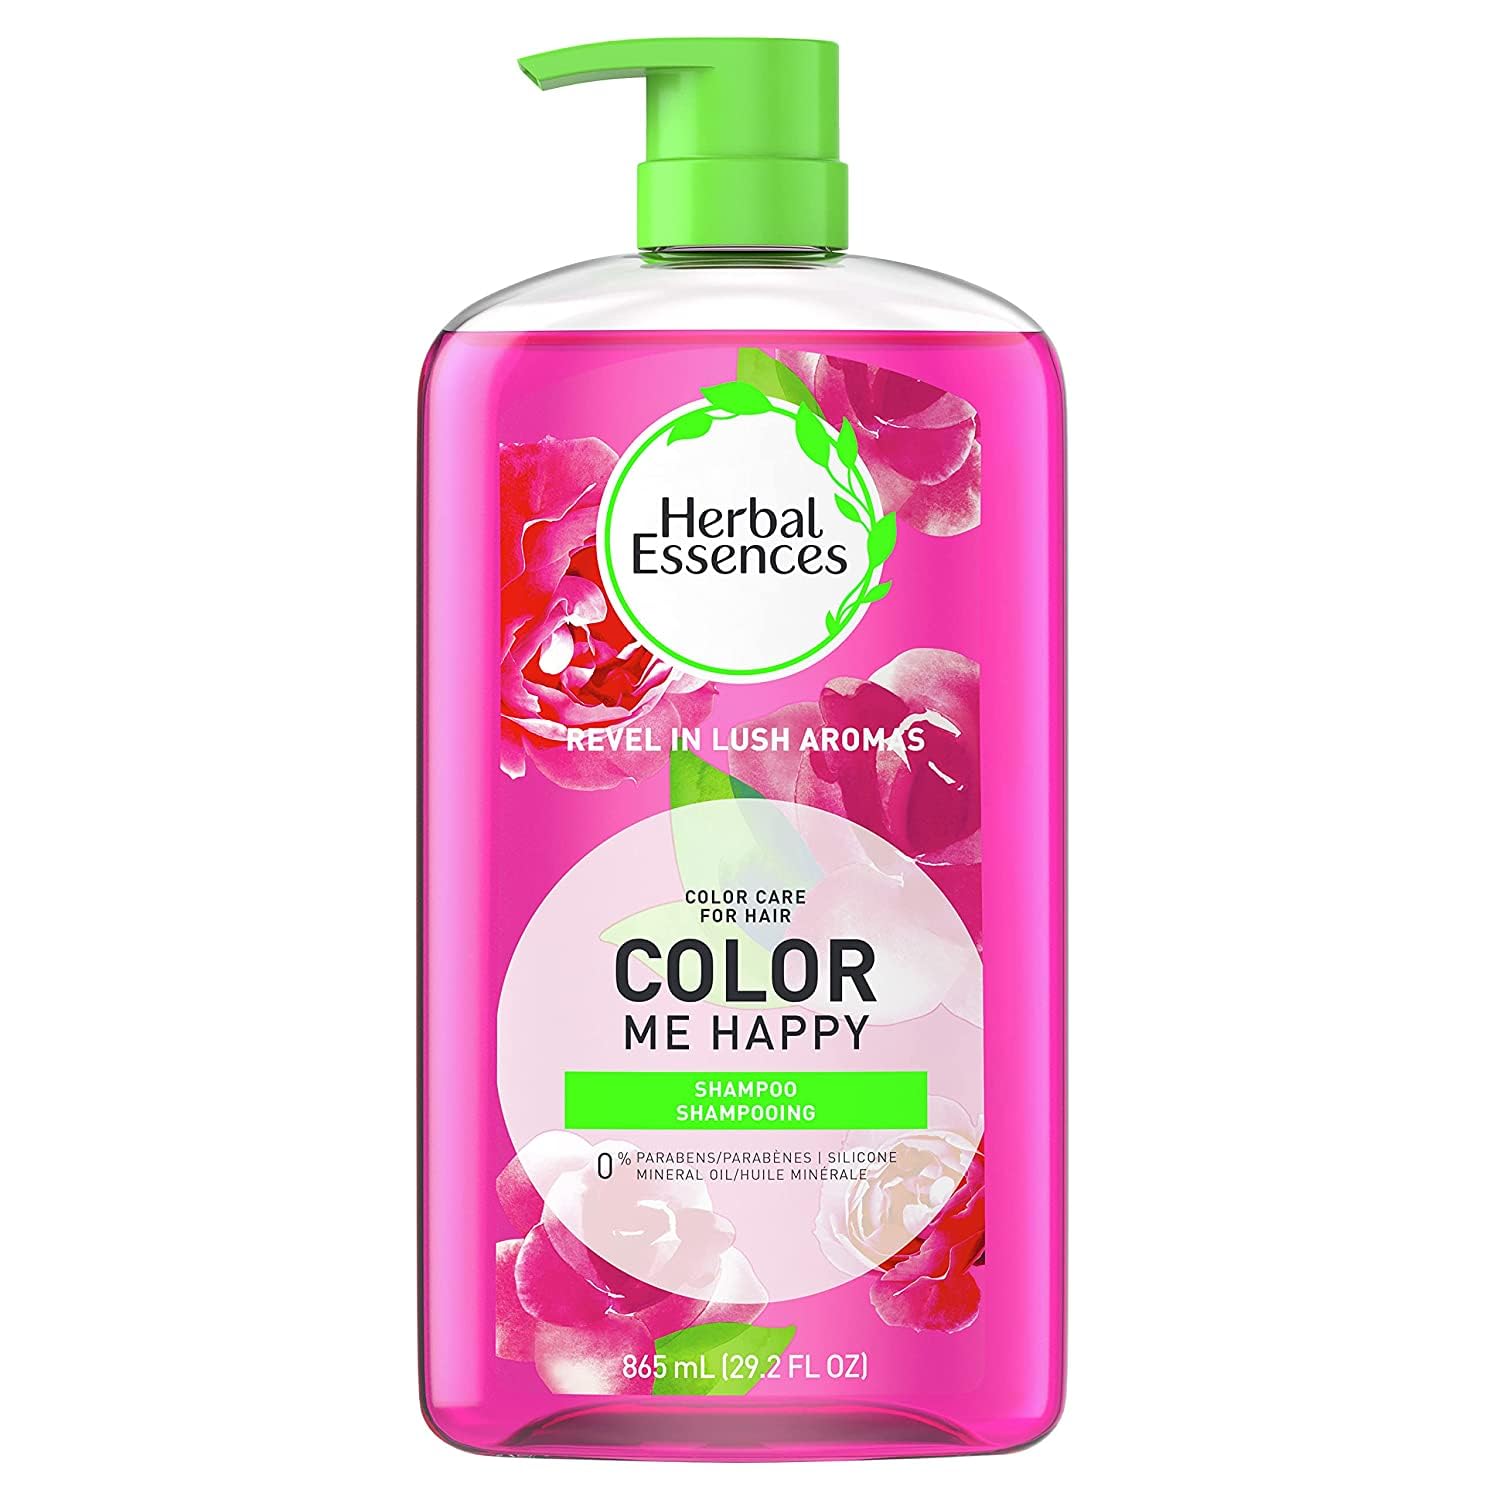 Herbal Essences Shampoo for Colored Hair